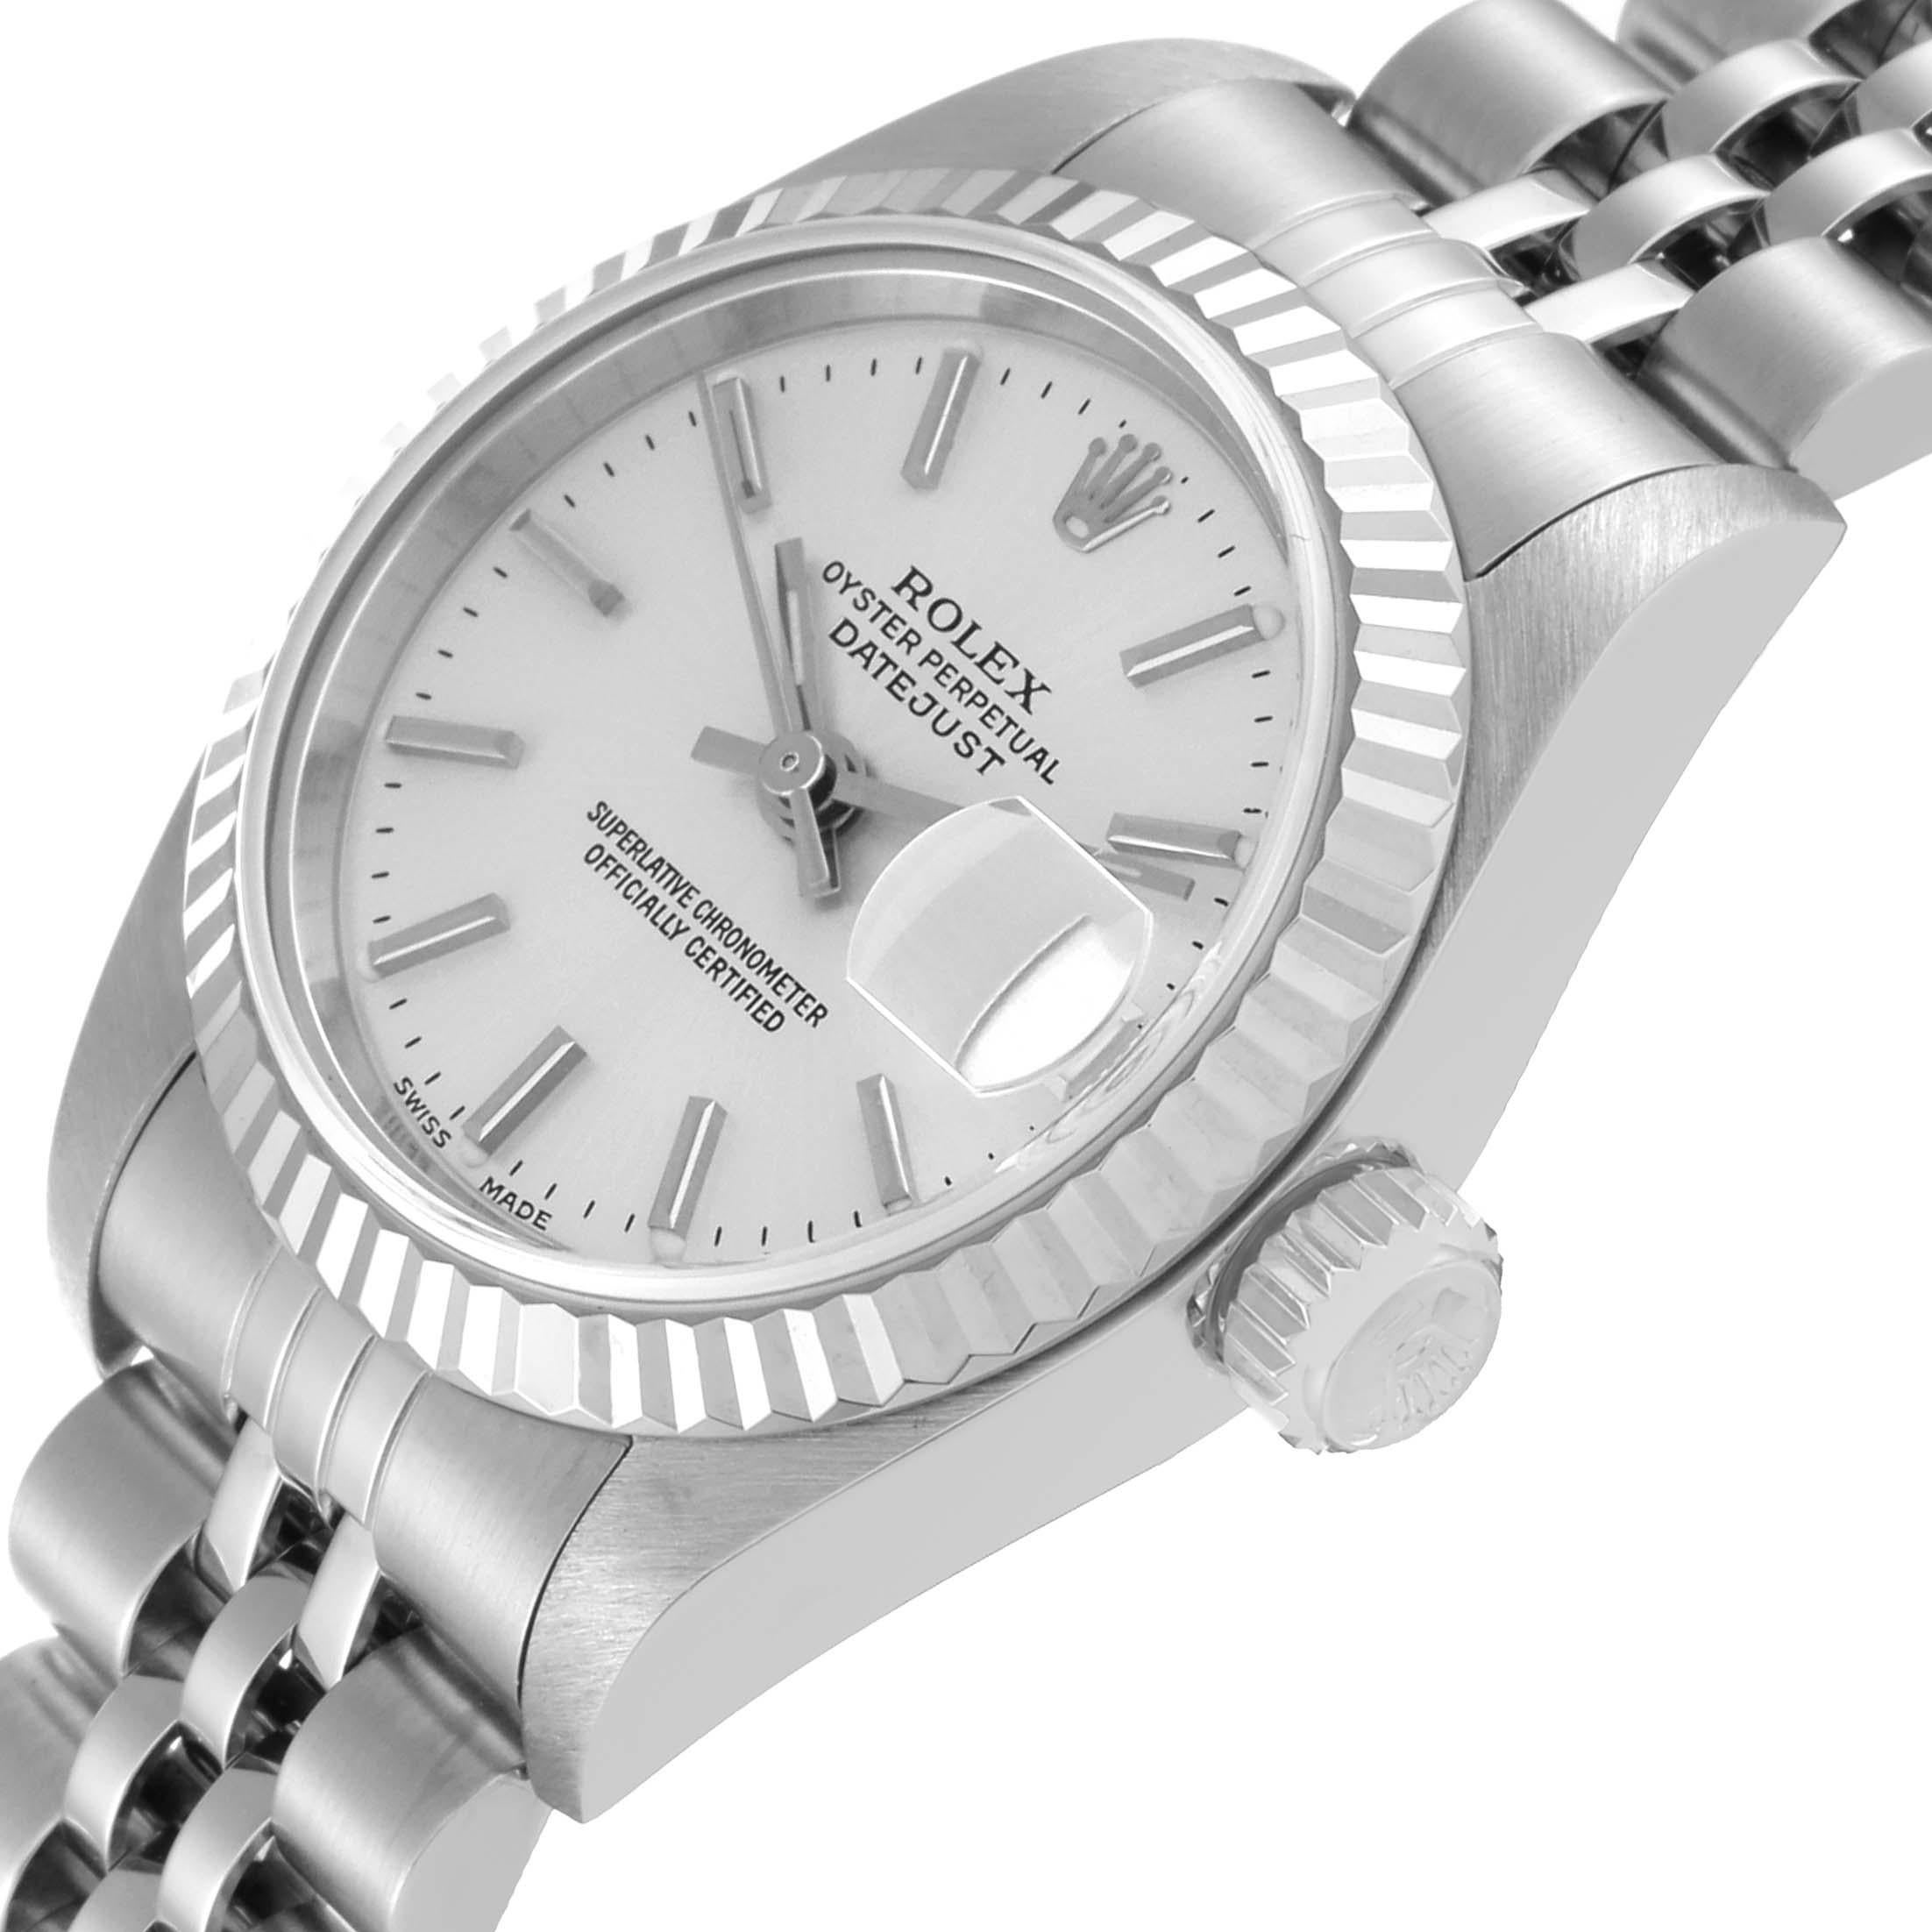 Rolex Datejust 26 Steel White Gold Silver Dial Ladies Watch 79174 Box Papers 1